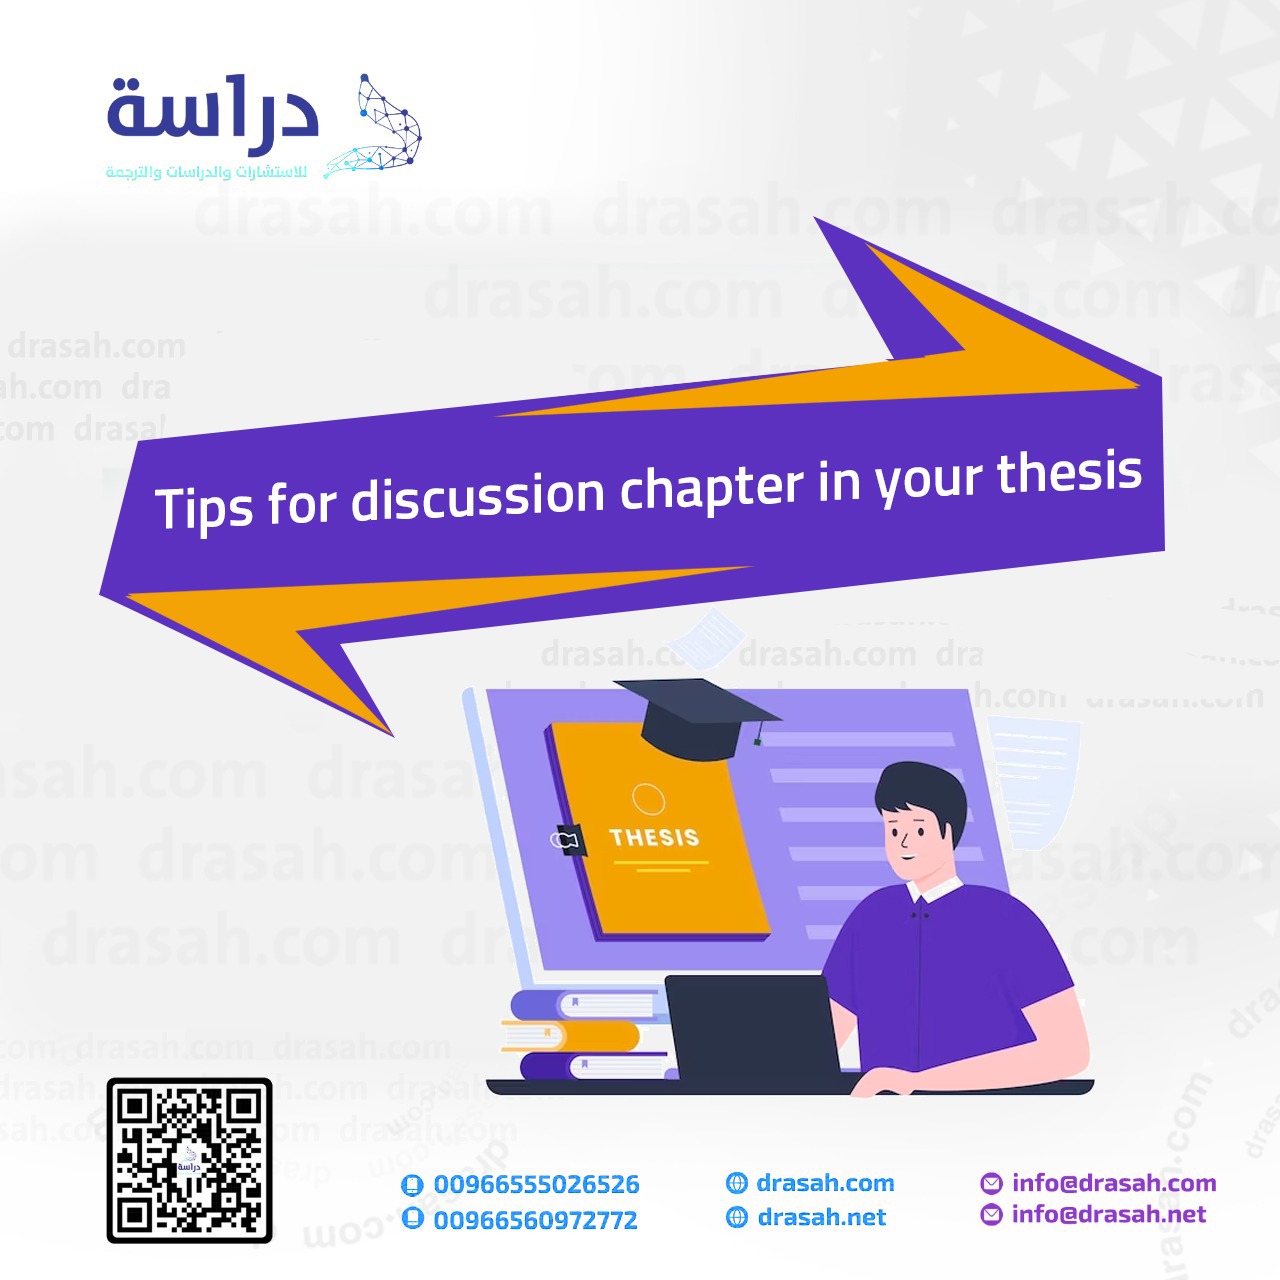 Tips for discussion chapter in your thesis